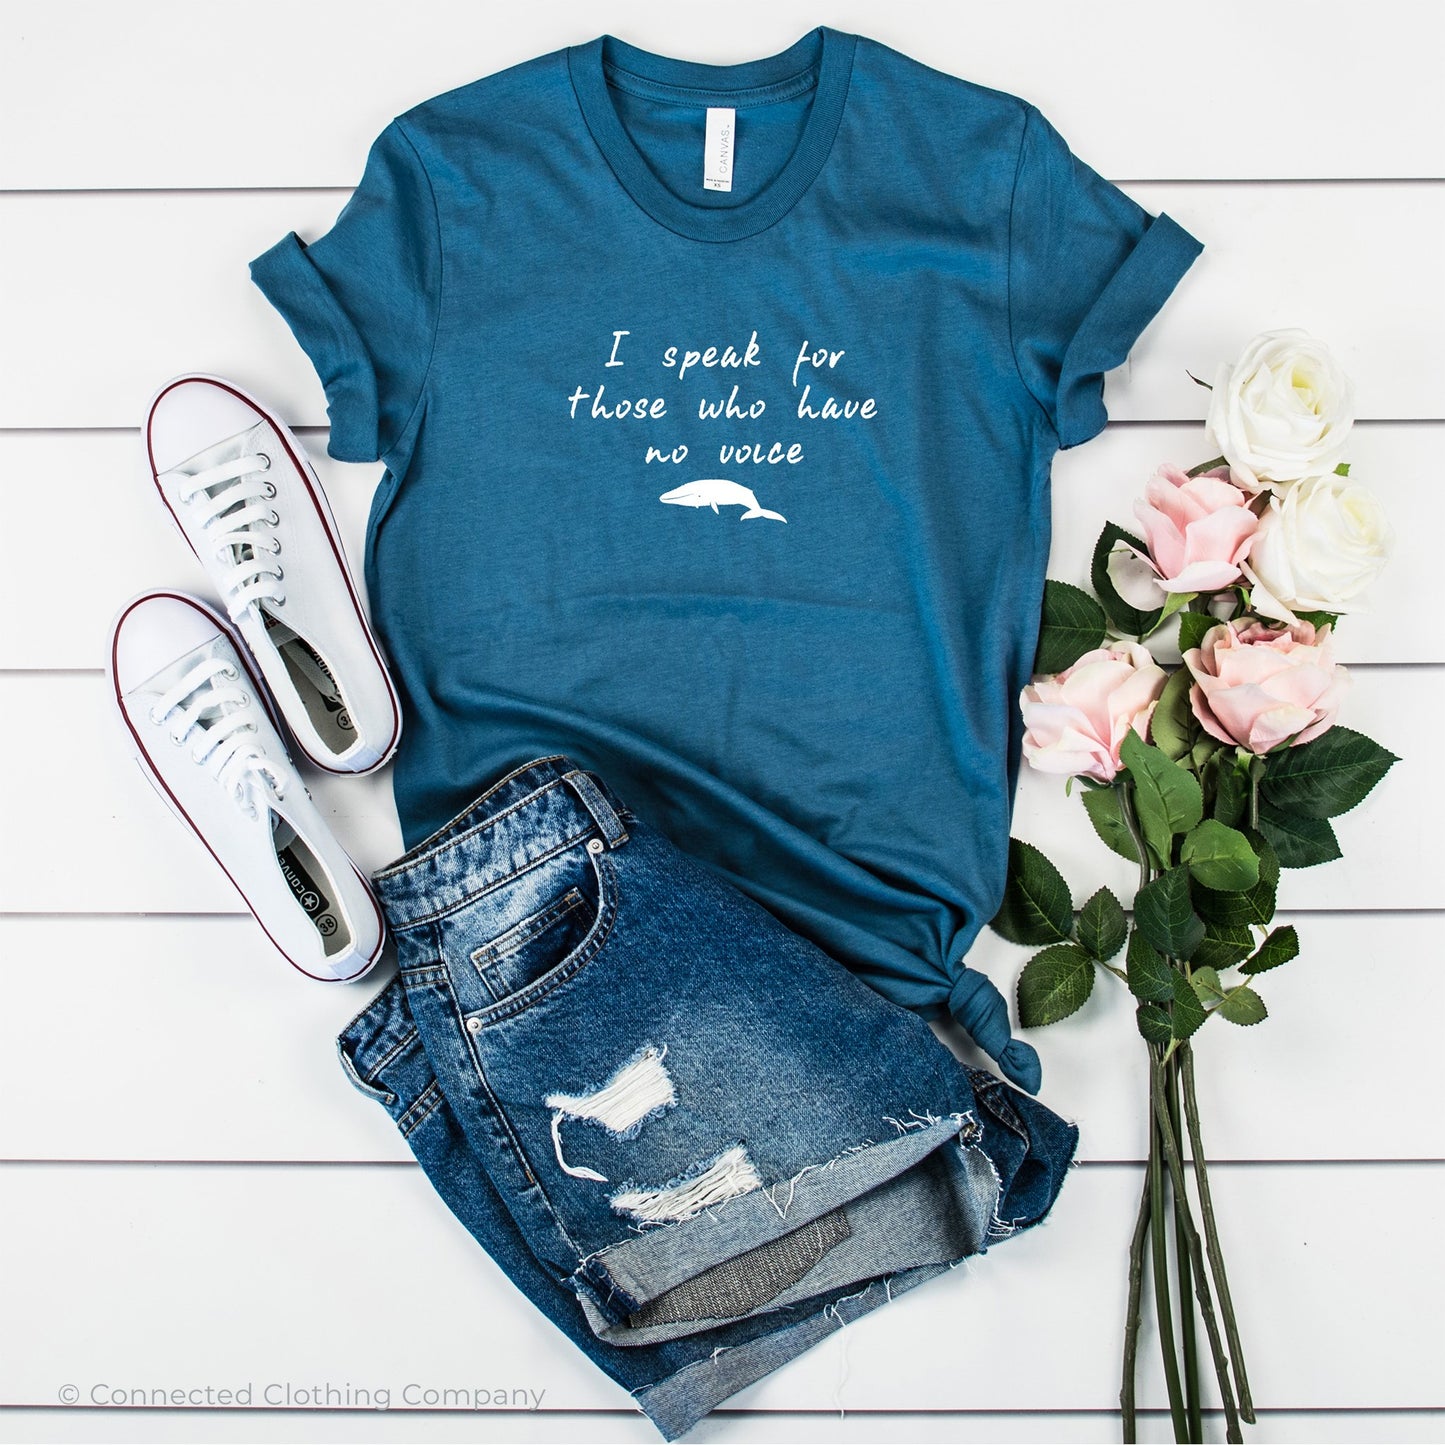 Be The Voice Whale Unisex Short-Sleeve Tee in Steel Blue - sweetsherriloudesigns donates 10% of the profits from this t-shirt to Mission Blue ocean conservation